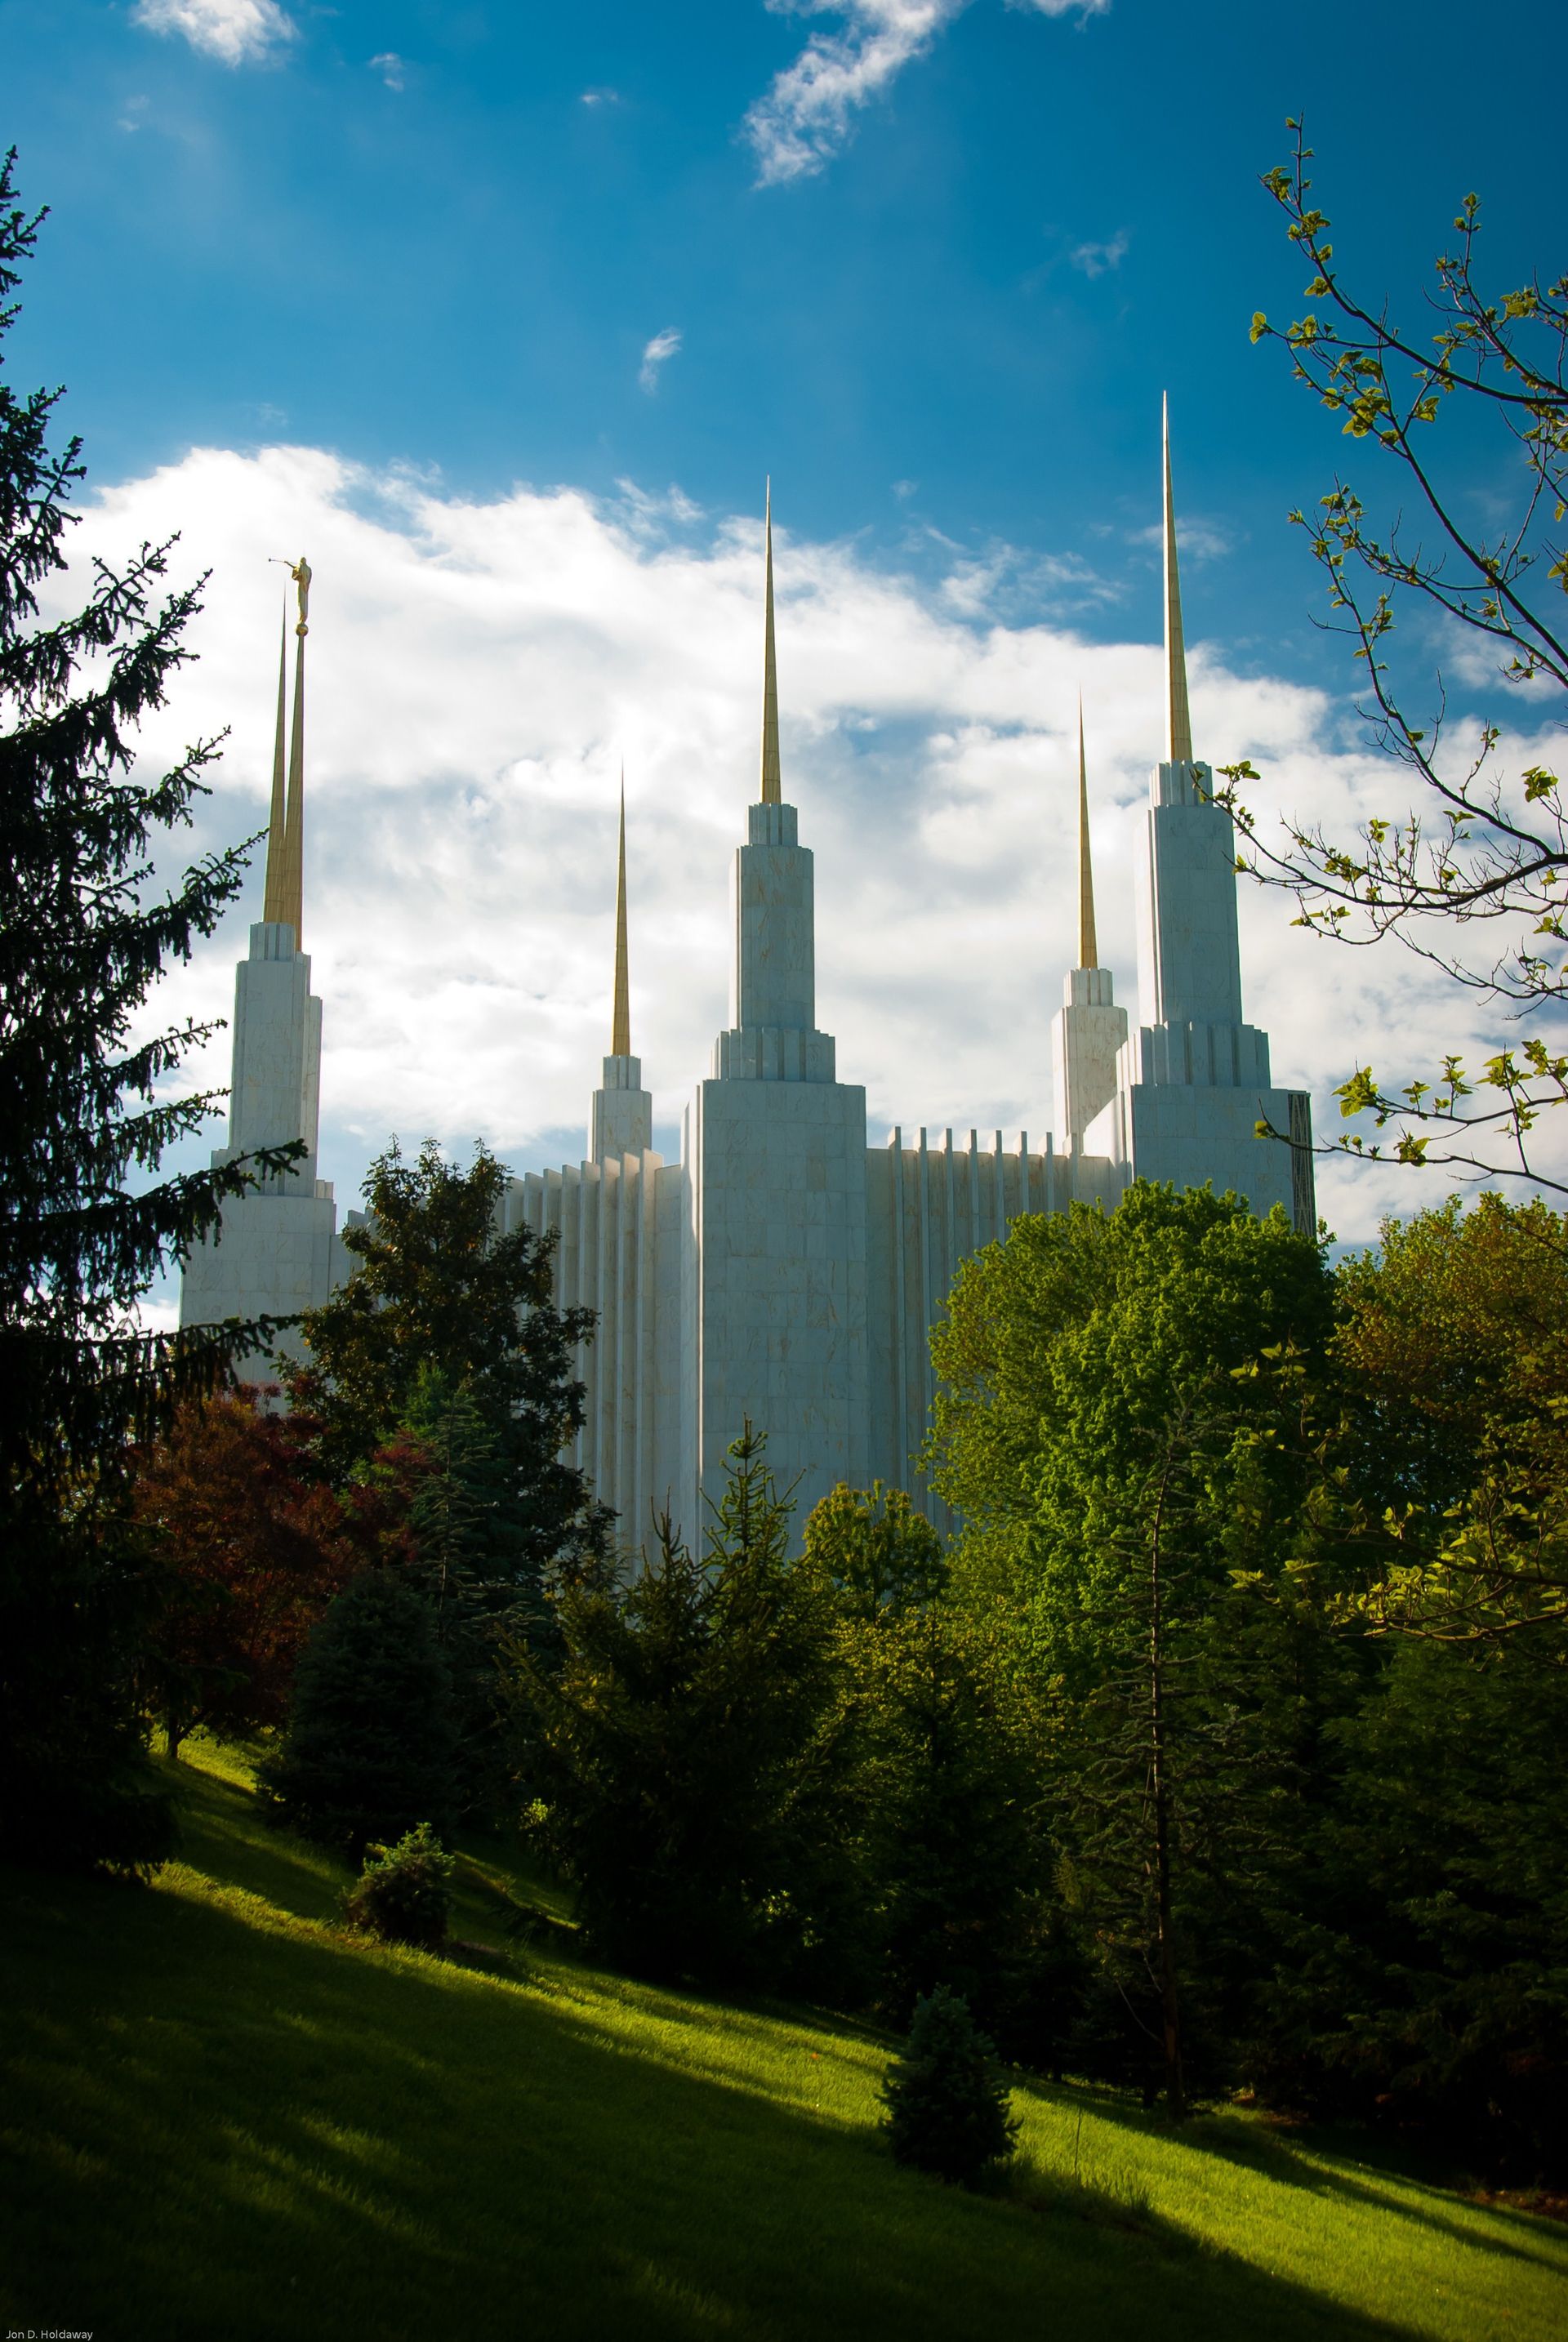 The Washington D.C. Temple, including the spires and scenery.